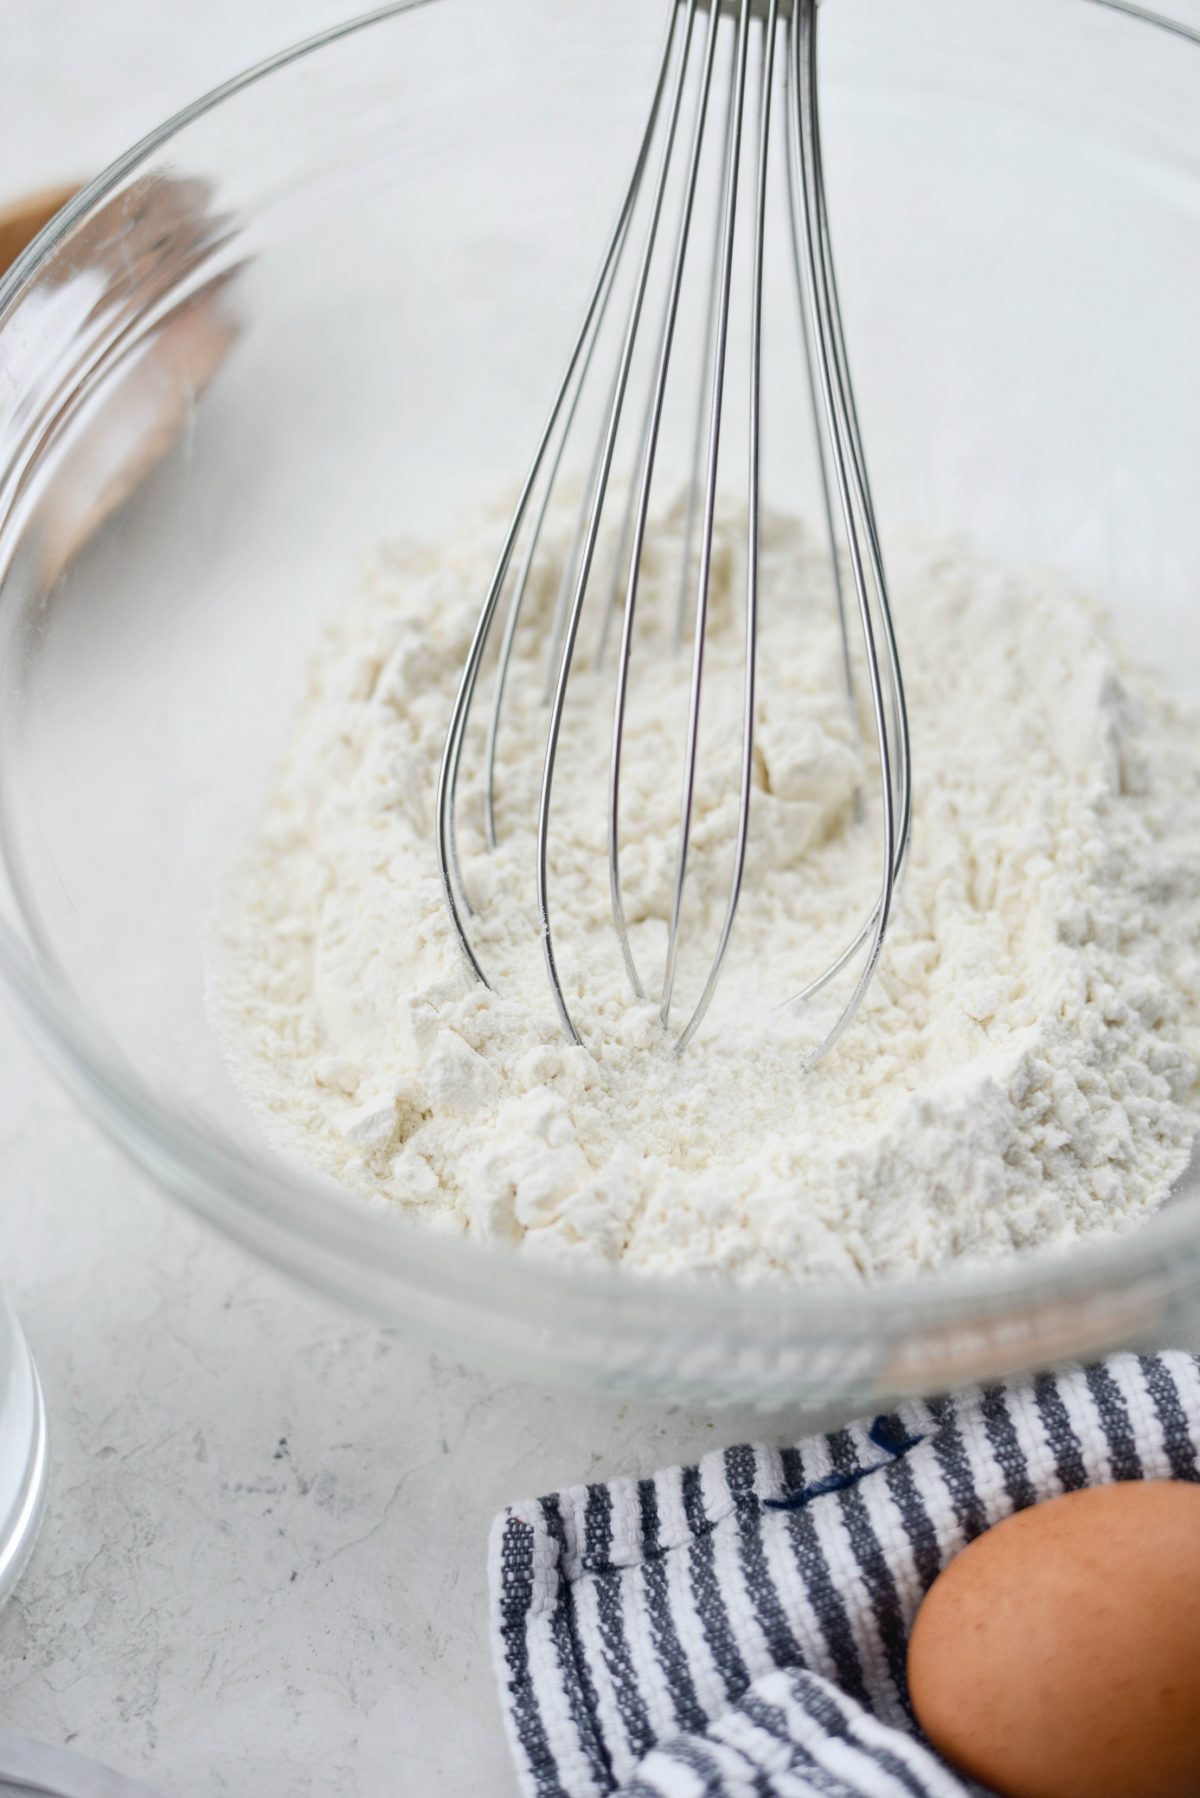 whisk dry ingredients together